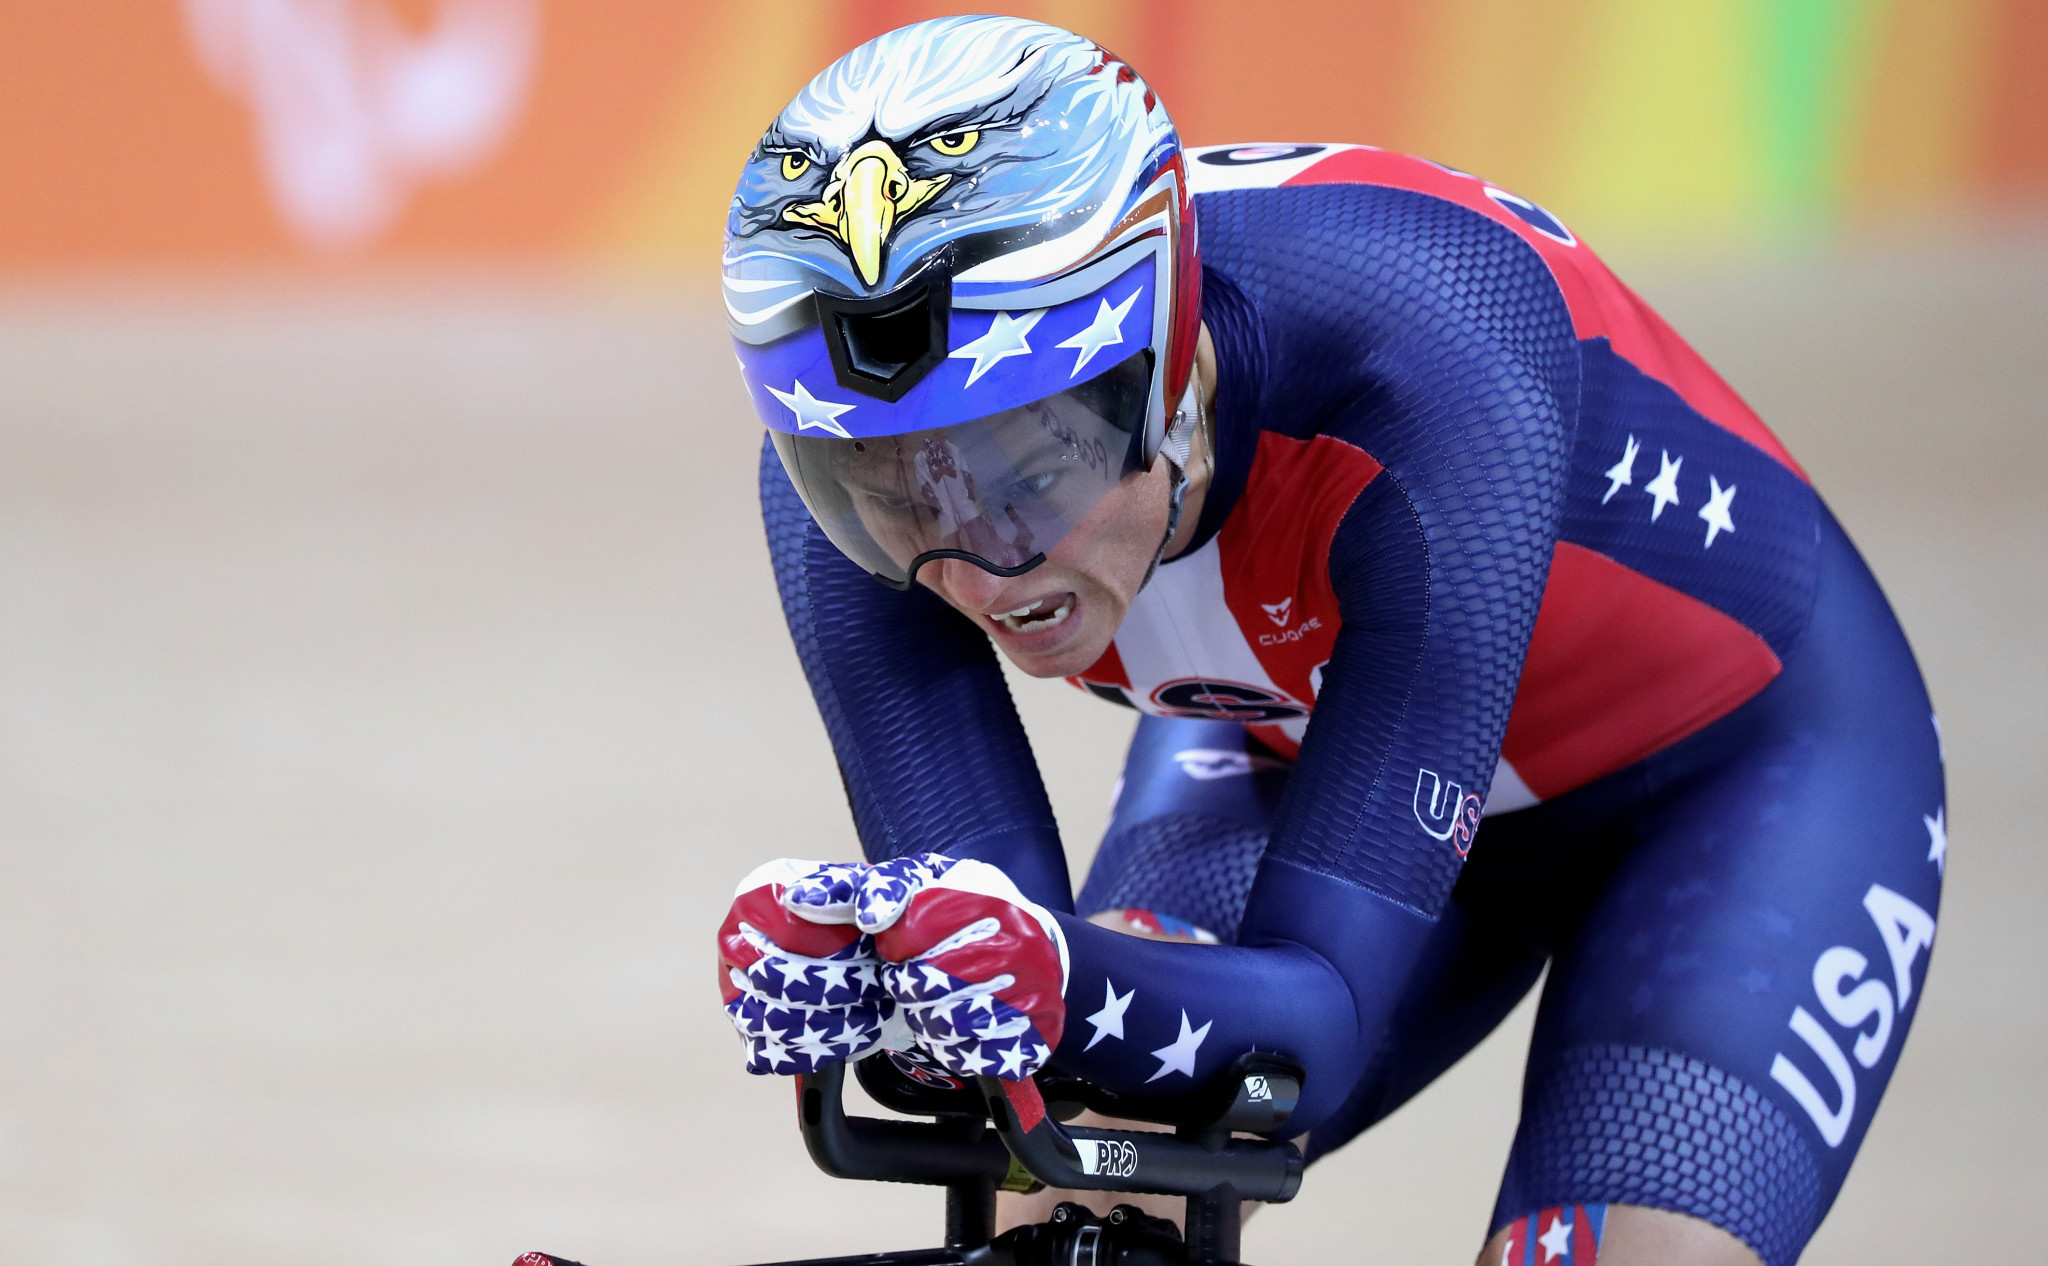 Shawn Morelli of the United States took the women's C4 individual pursuit honours ©Getty Images